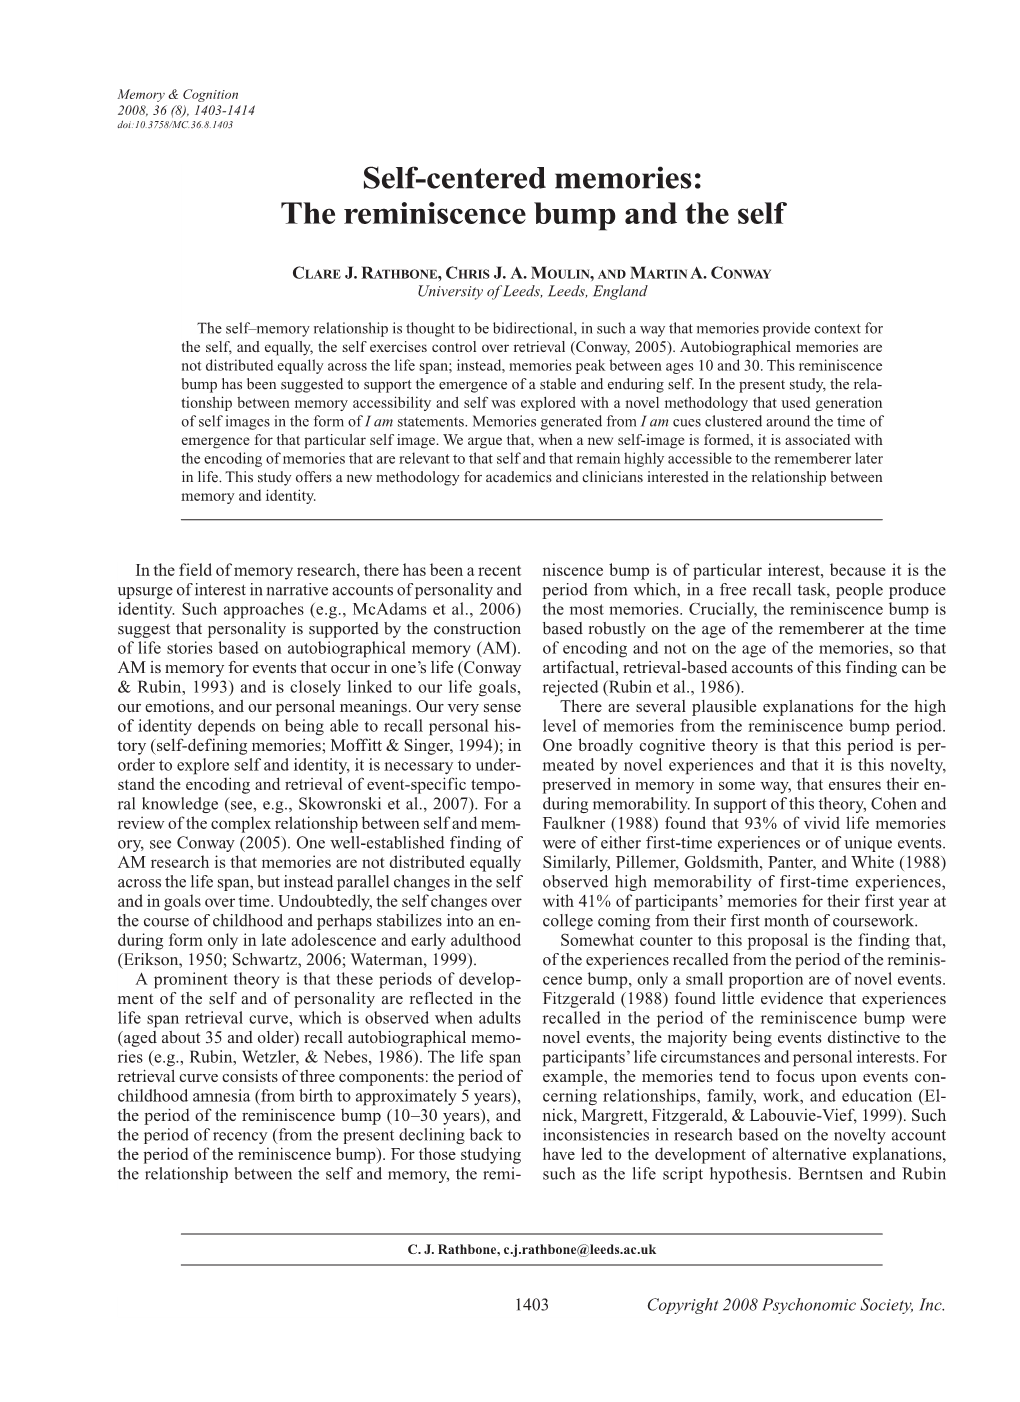 Self-Centered Memories: the Reminiscence Bump and the Self